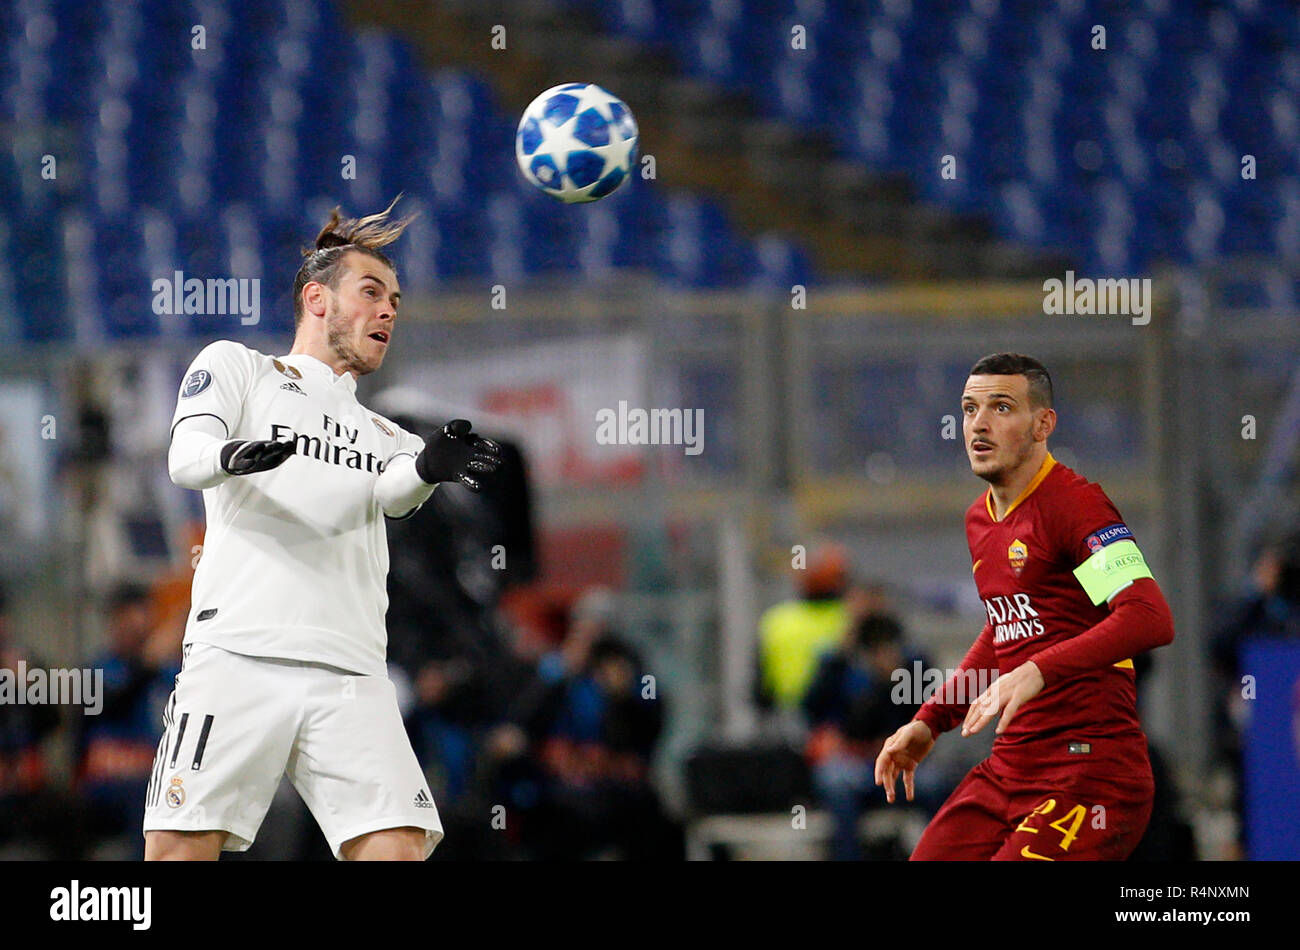 Rome, Italy, 27th November, 2018. Real Madrid's Gareth Bale, left, heads  the ball past Roma's Alessandro Florenzi during the Champions League Group  G soccer match between Roma and Real Madrid at the